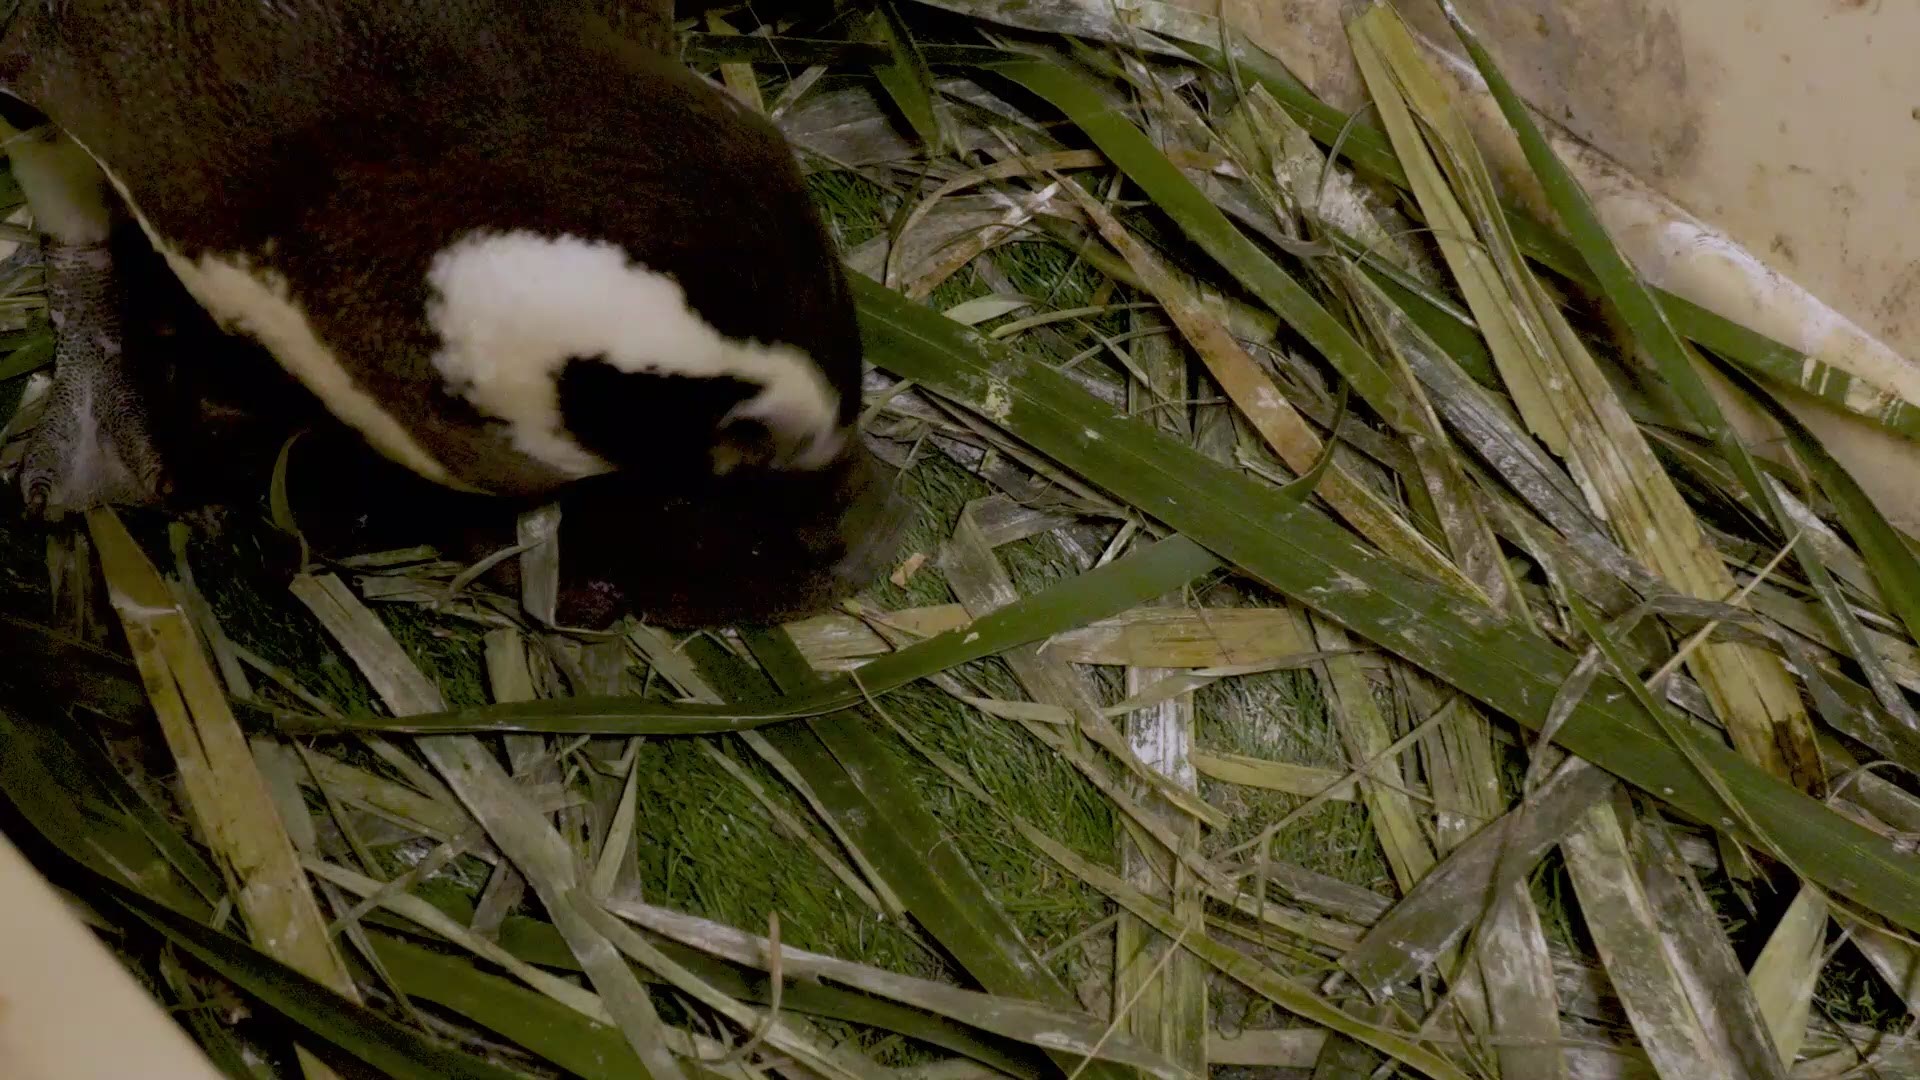 The chick hatched on March 25 to parents Oreo and Kowalski. The zoo says this is their fourth successful hatchling.